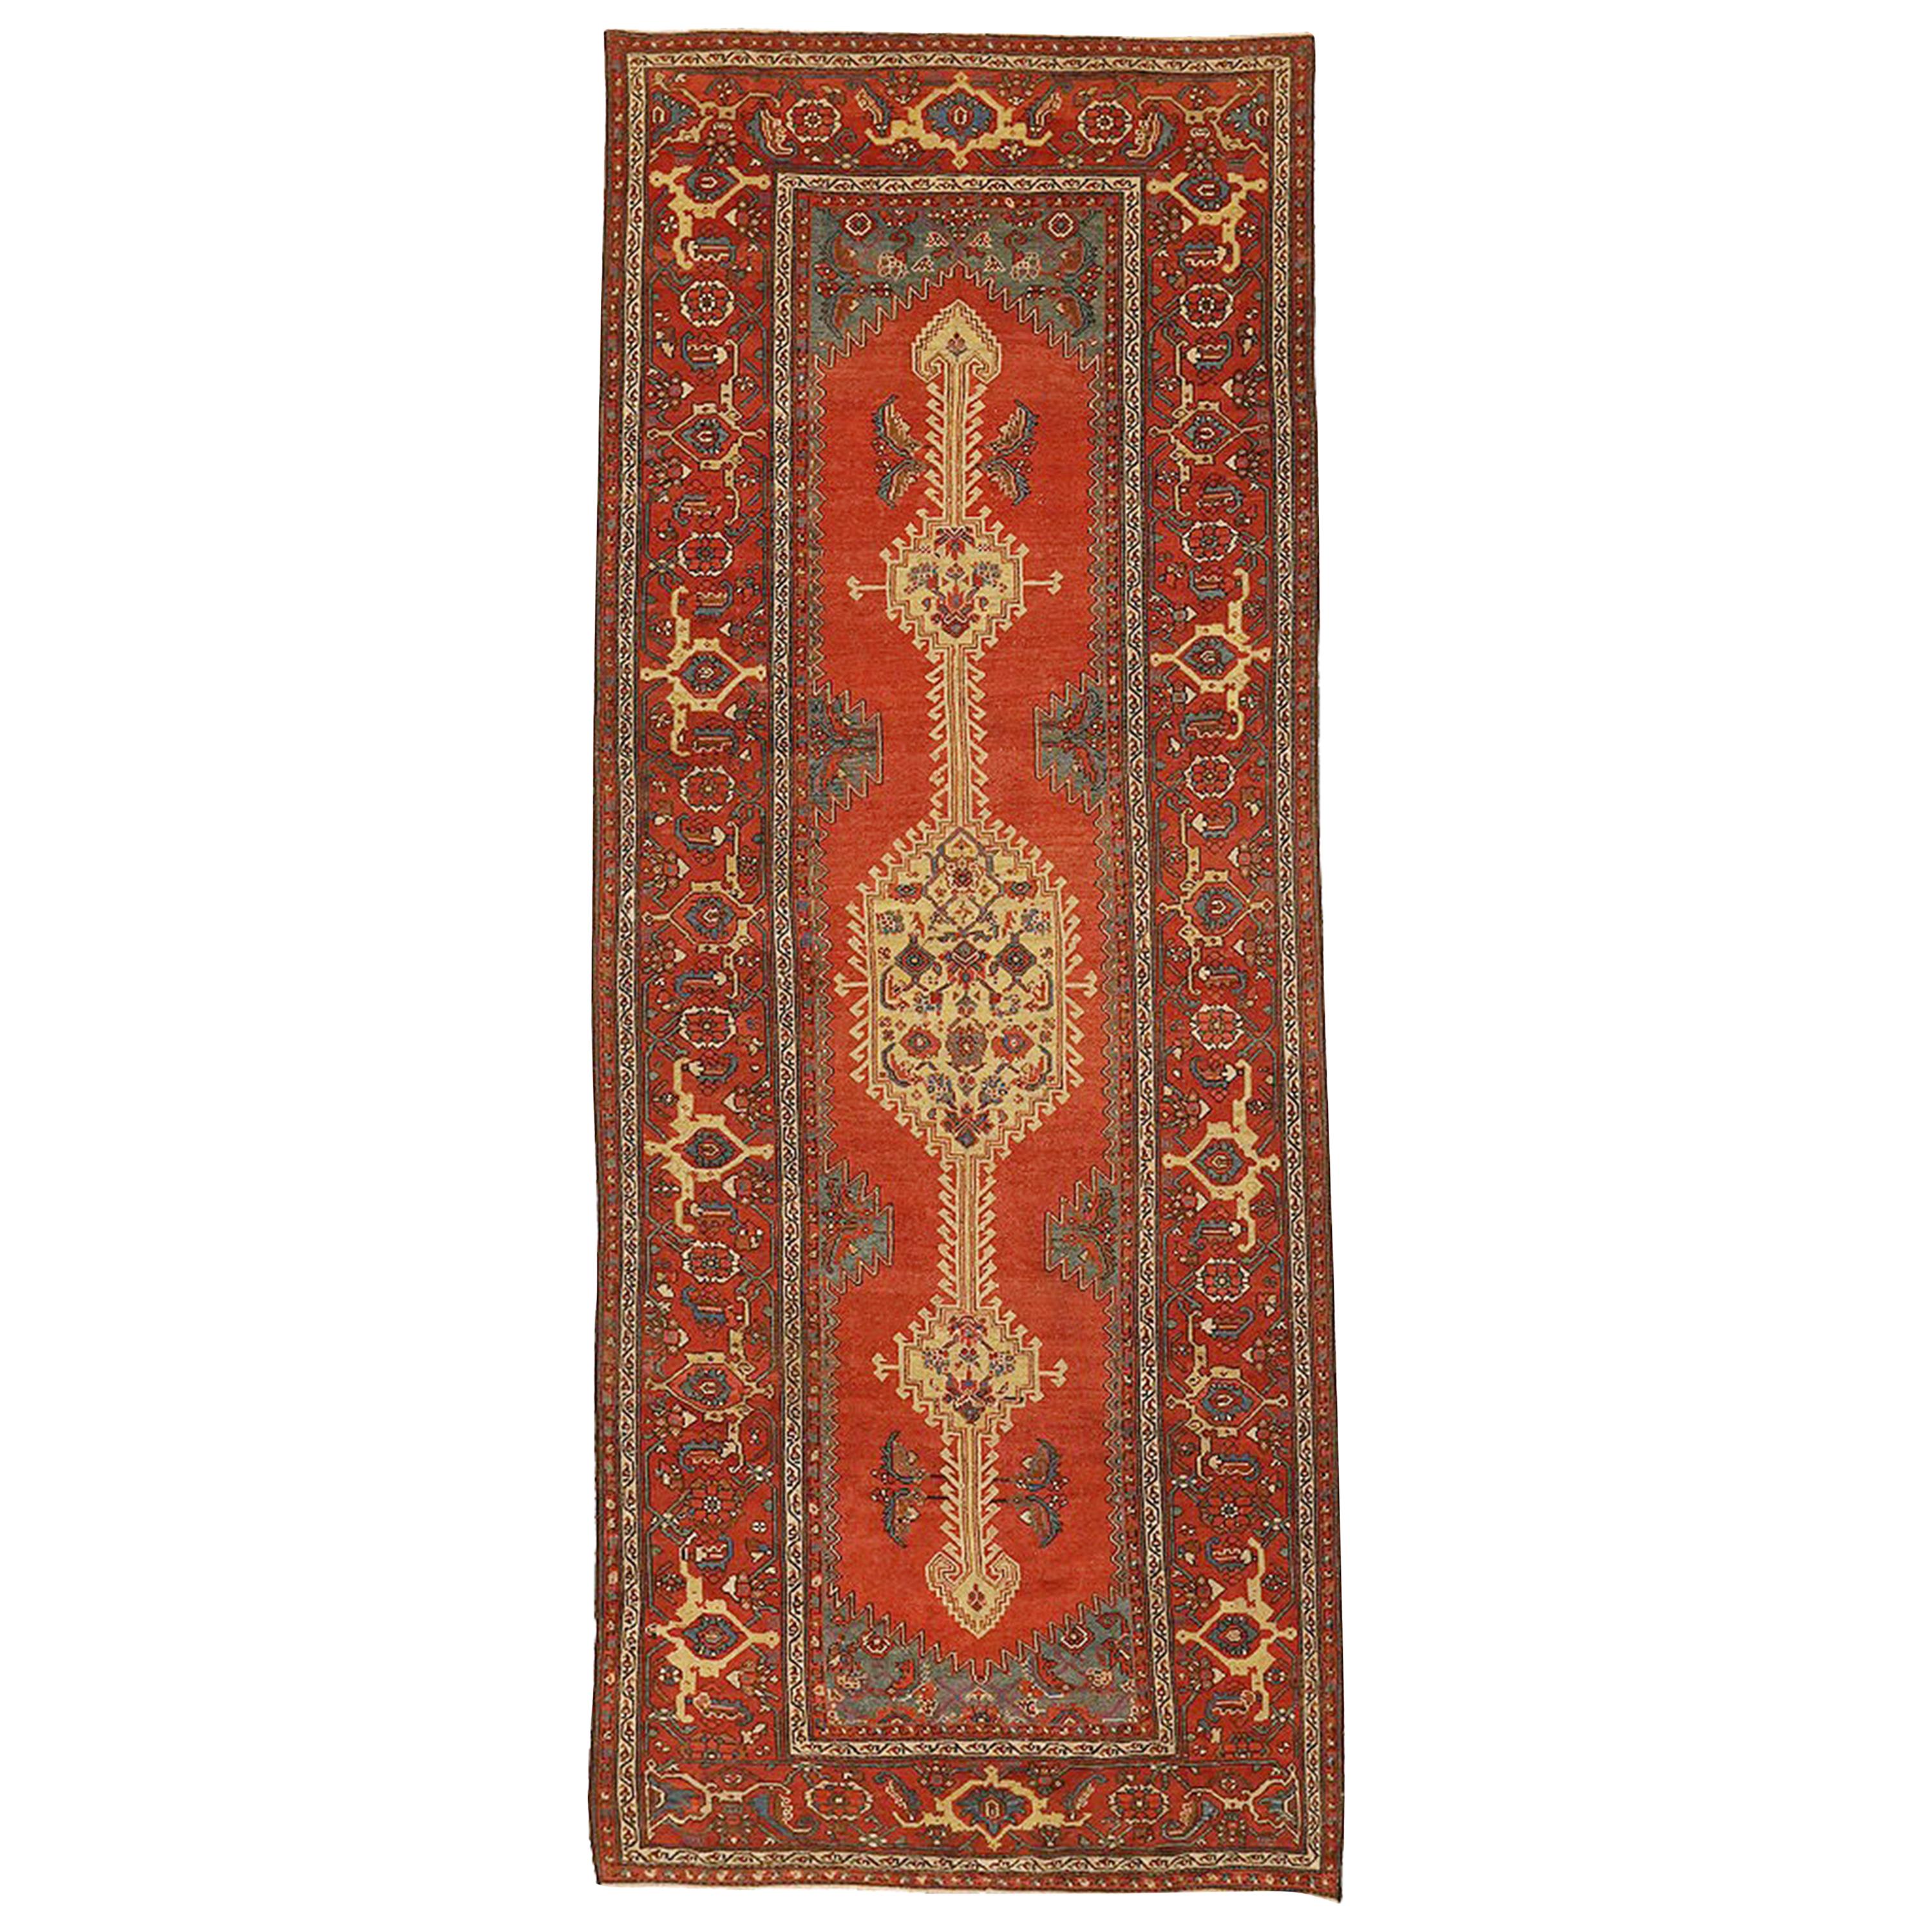 1900s Antique Azerbaijan Rug with Ivory Central Medallion over Red Field